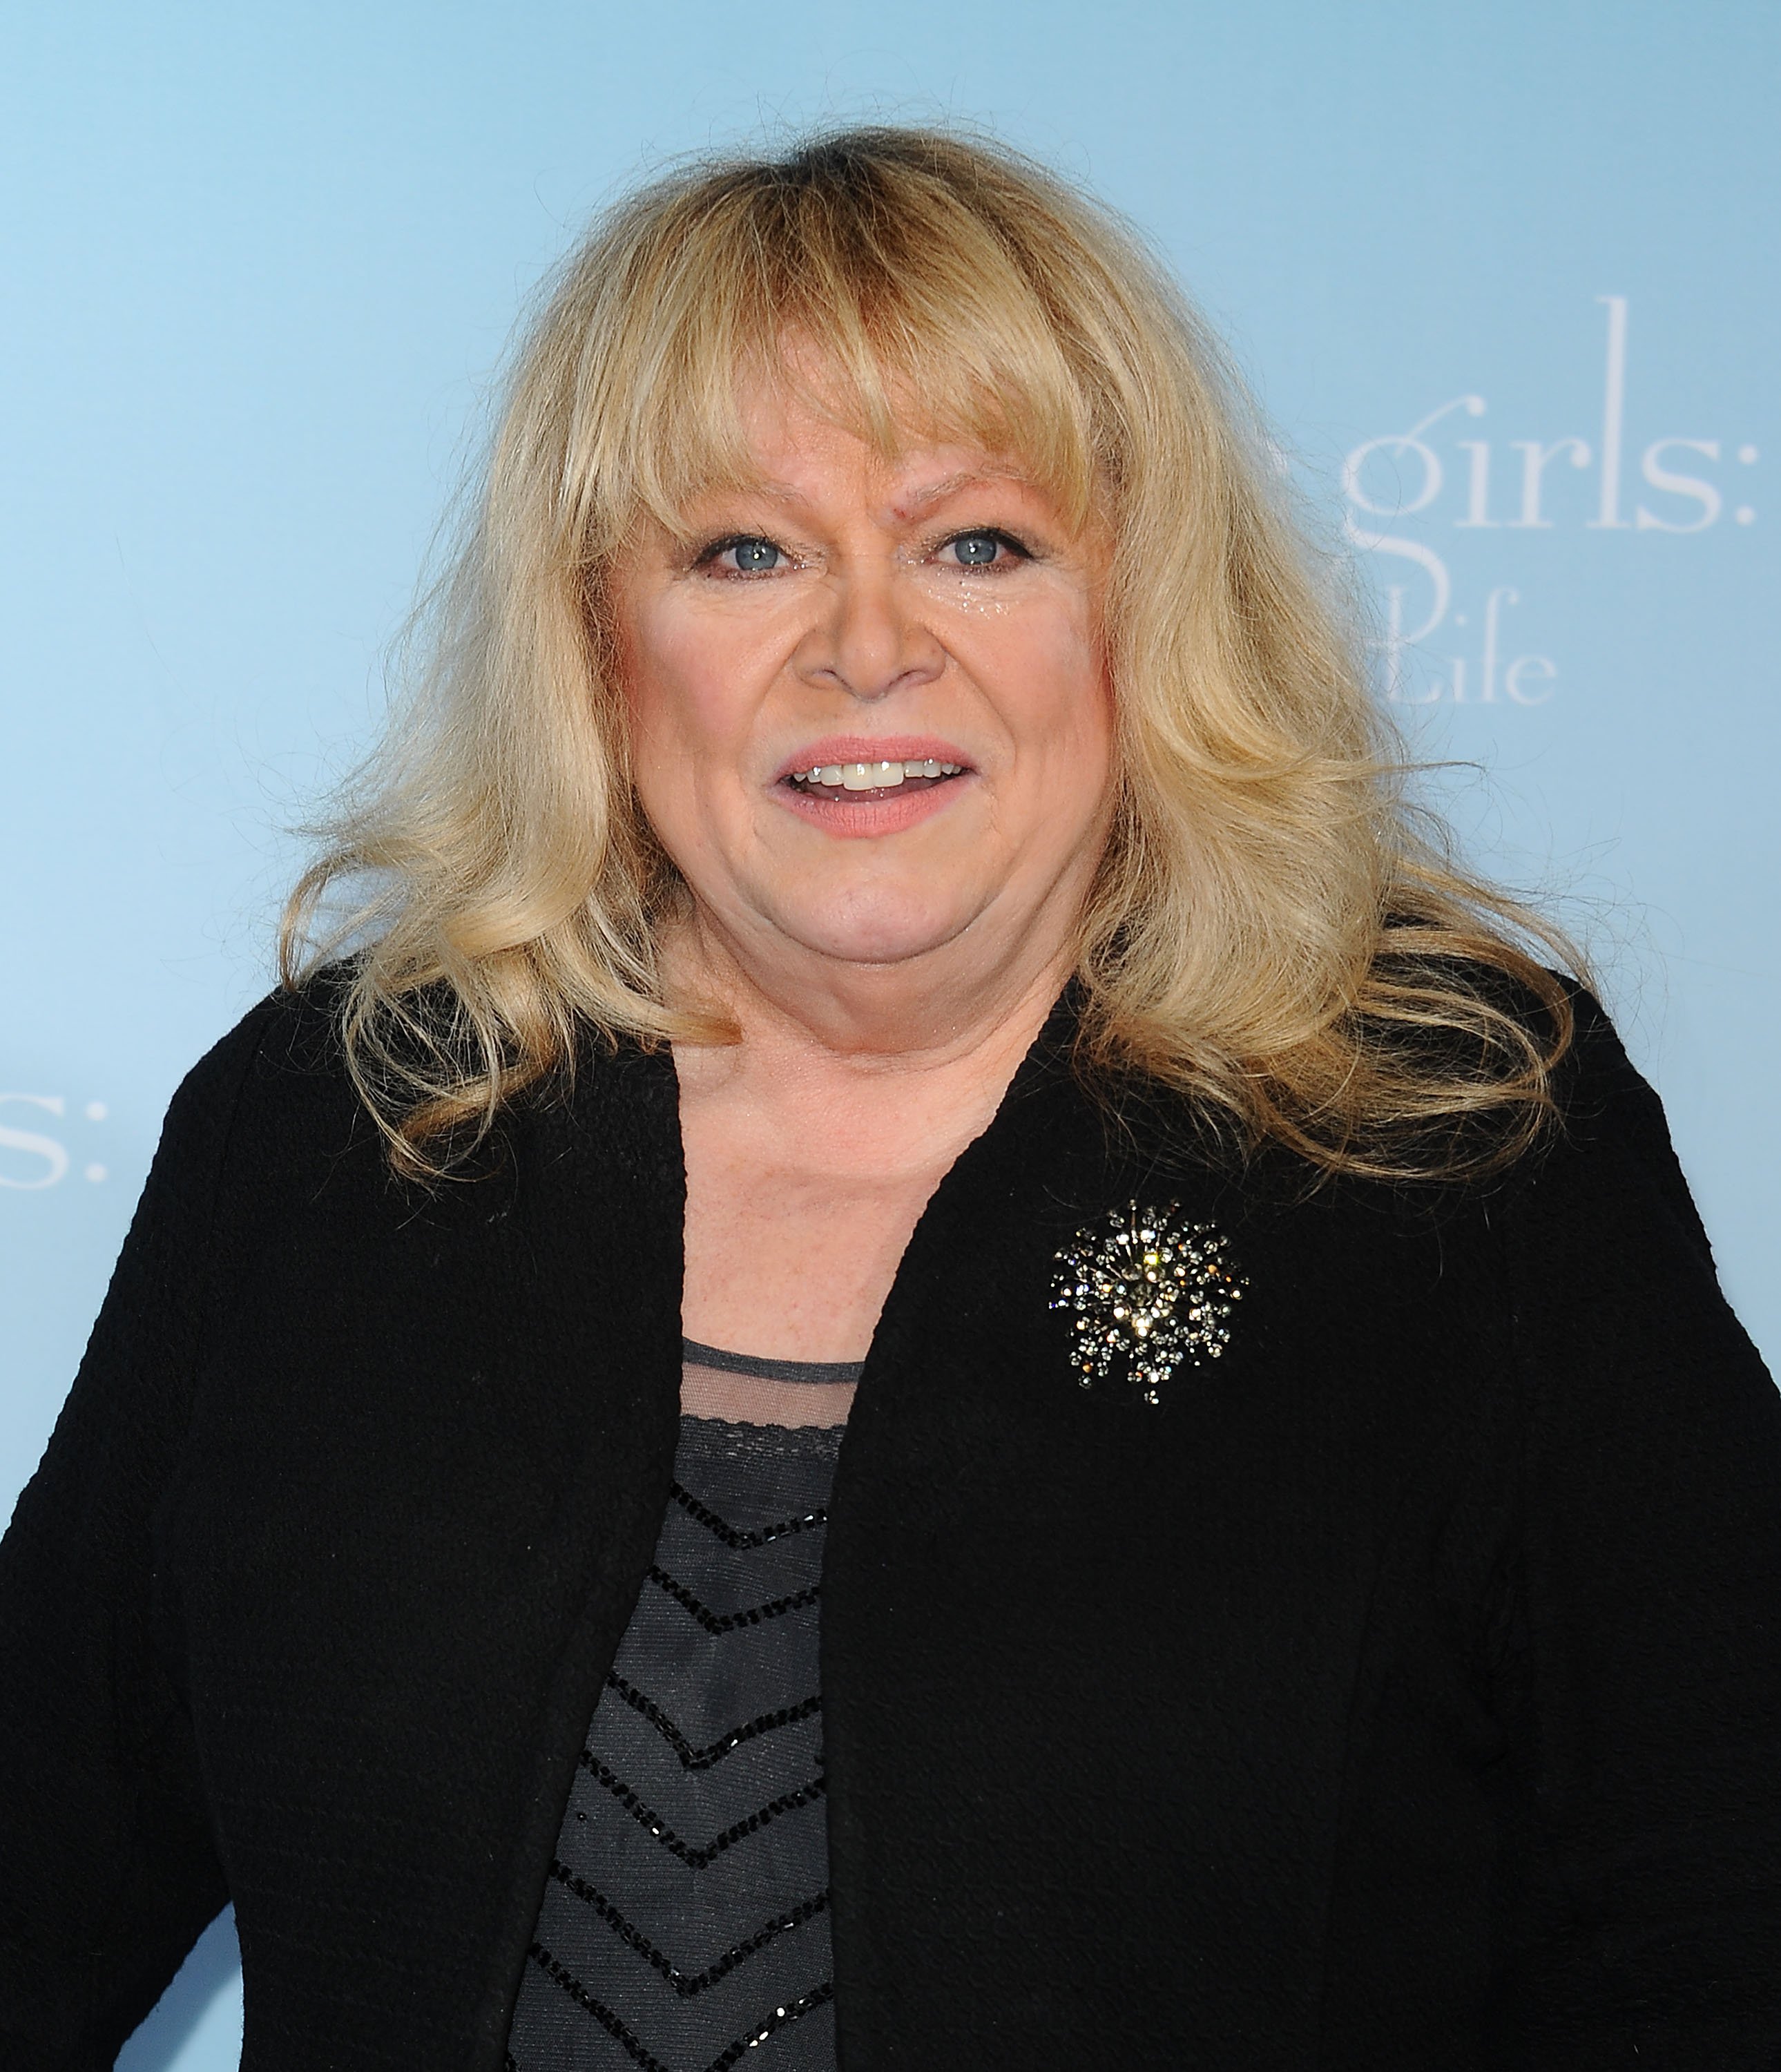 Actress Sally Struthers at the premiere of "Gilmore Girls: A Year in the Life" at Regency Bruin Theatre on November 18, 2016 in Los Angeles, California. | Source: Getty Images